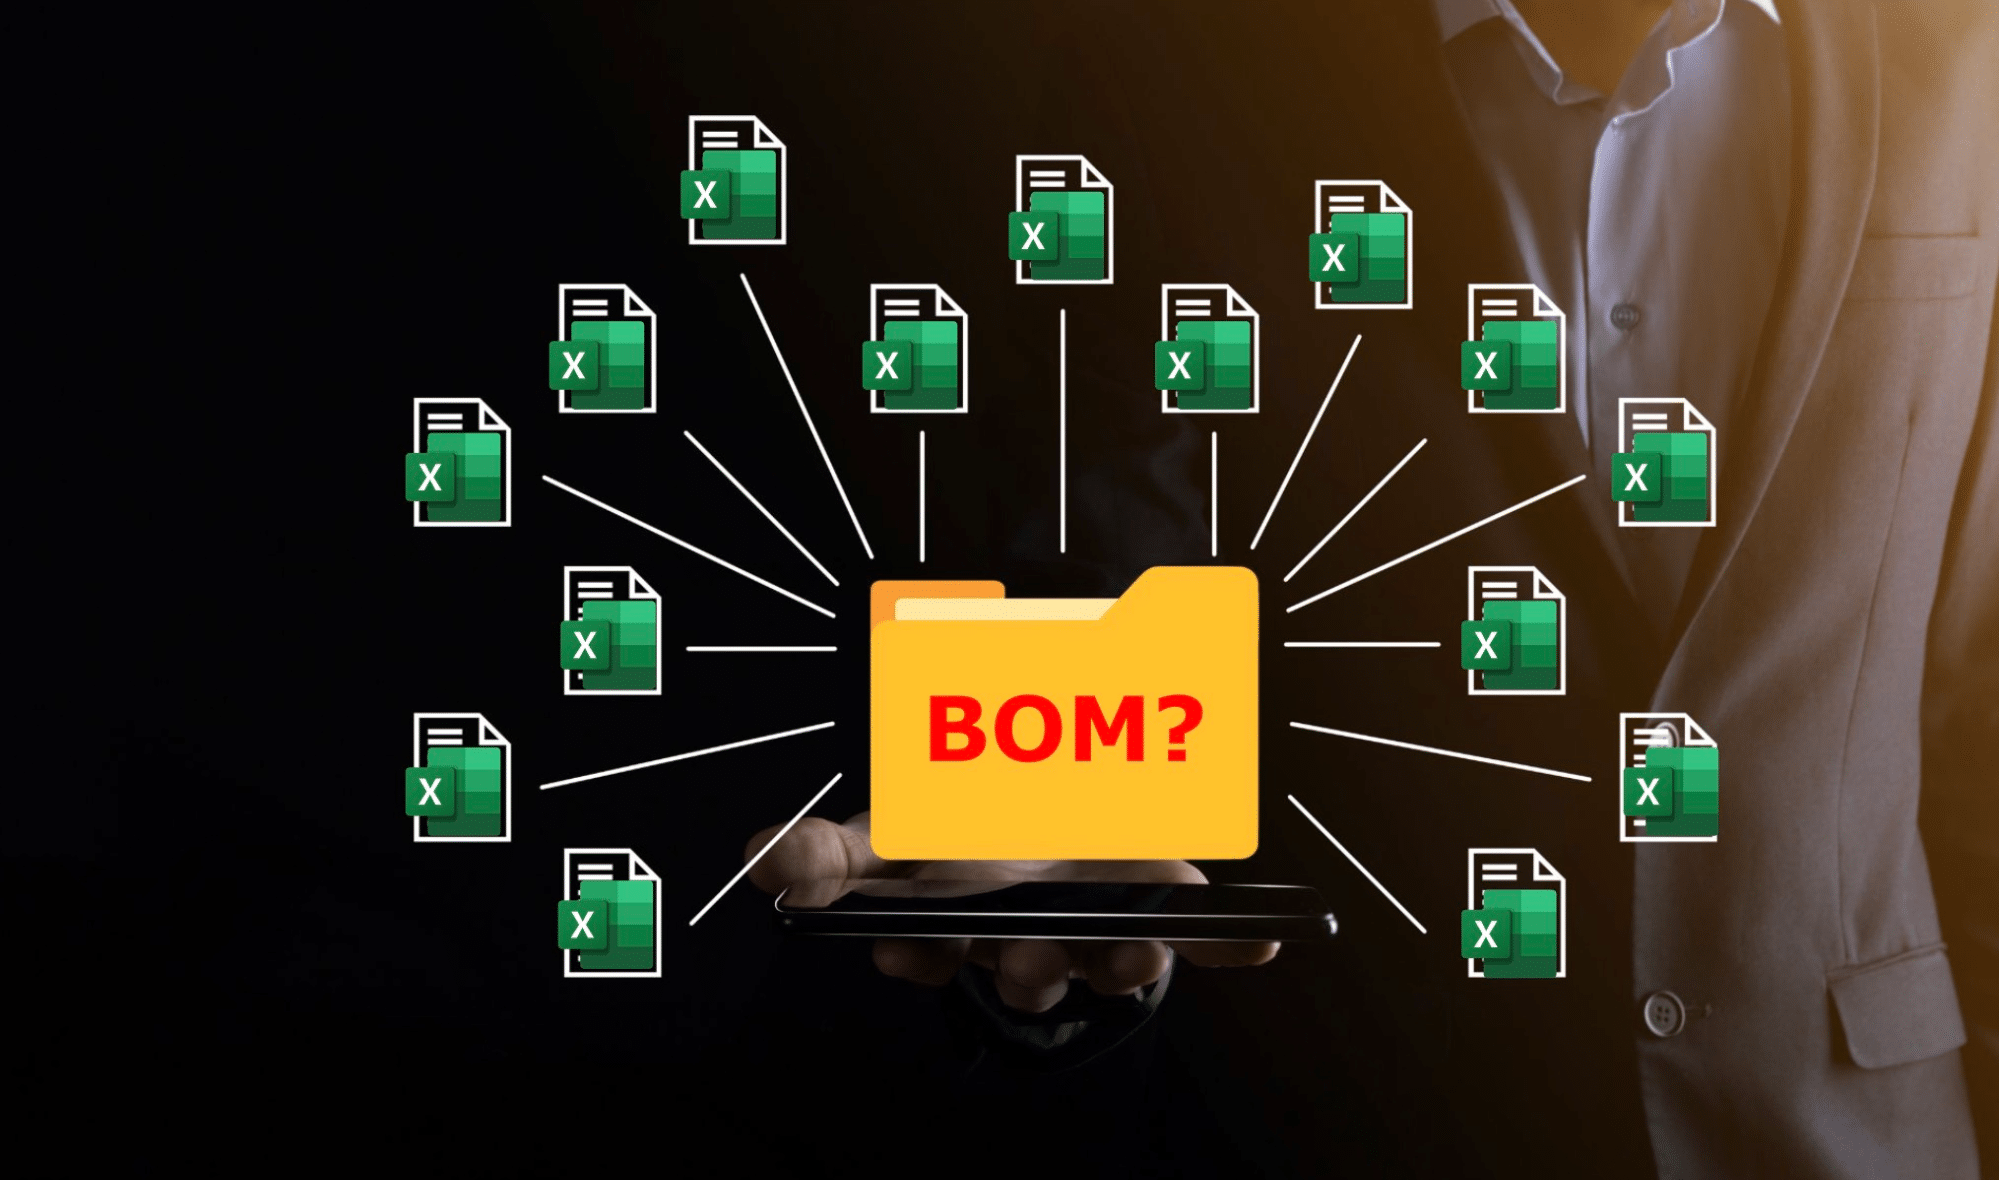 5 Reasons Why Managing BOM in Excel File Saved in SVN Is A Very Bad Idea